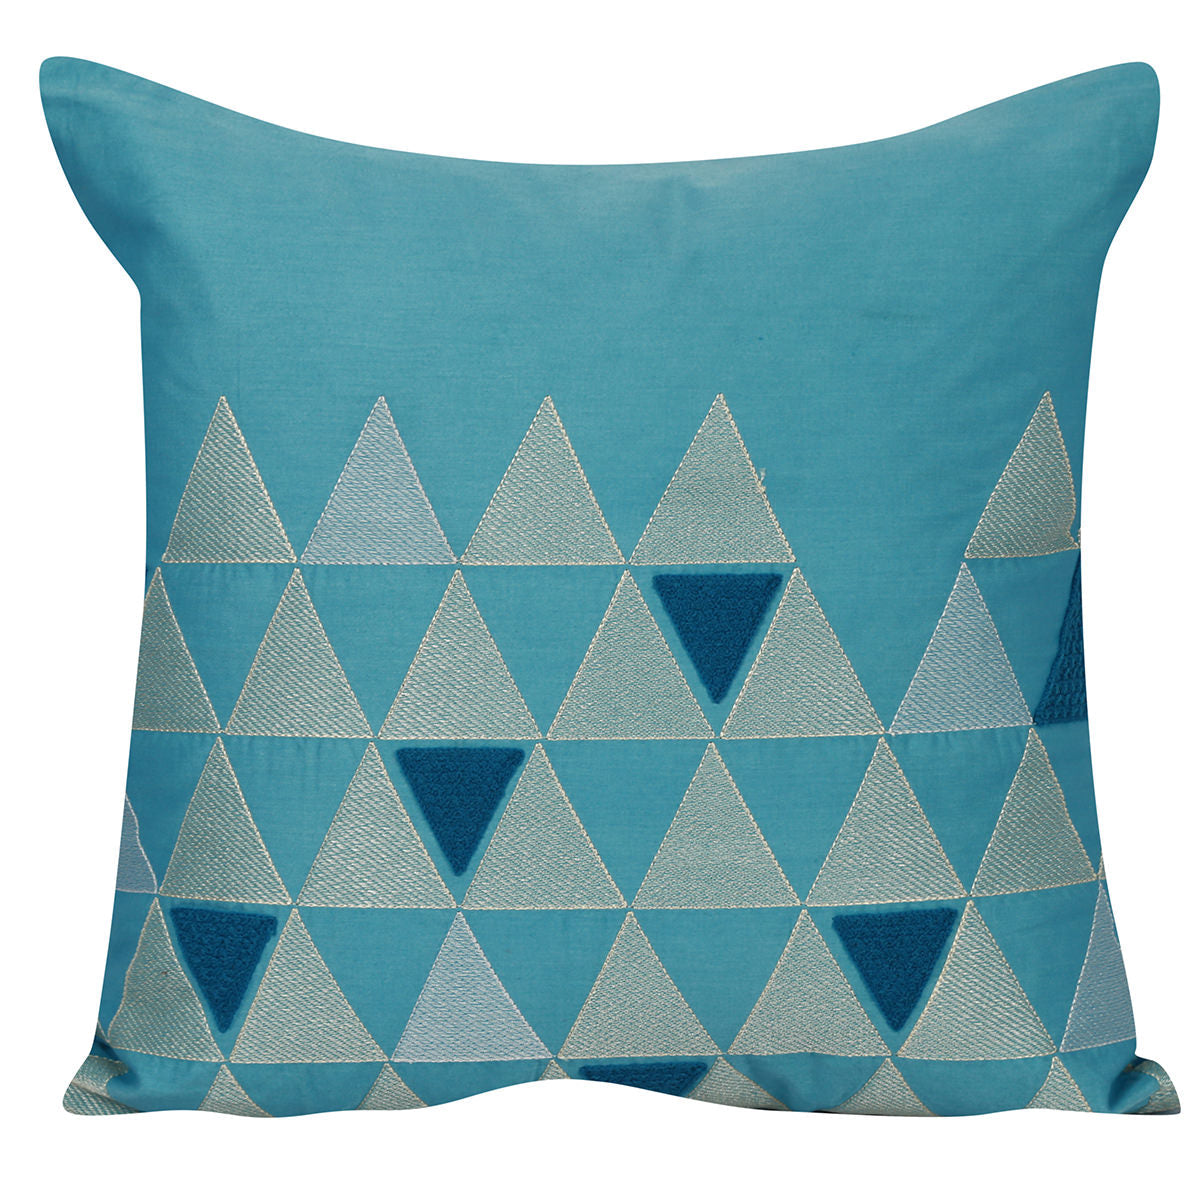 Graphic Triangle Embroidered Cushion Cover